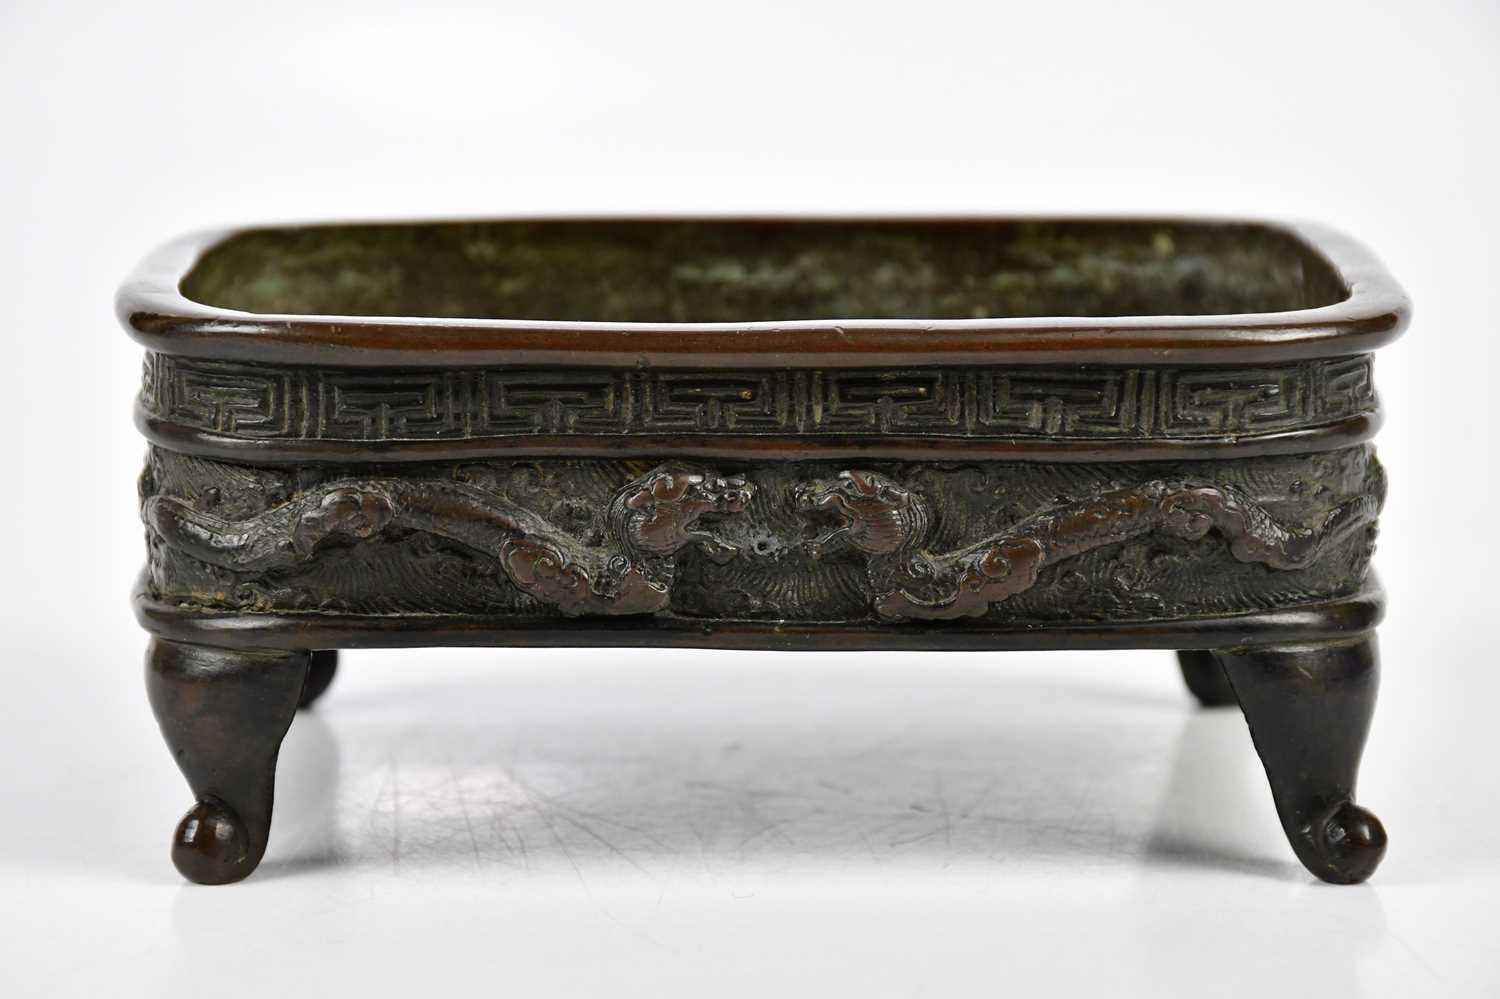 A late 19th century Japanese bronze bowl, with cast decoration of mythical beasts and Greek key